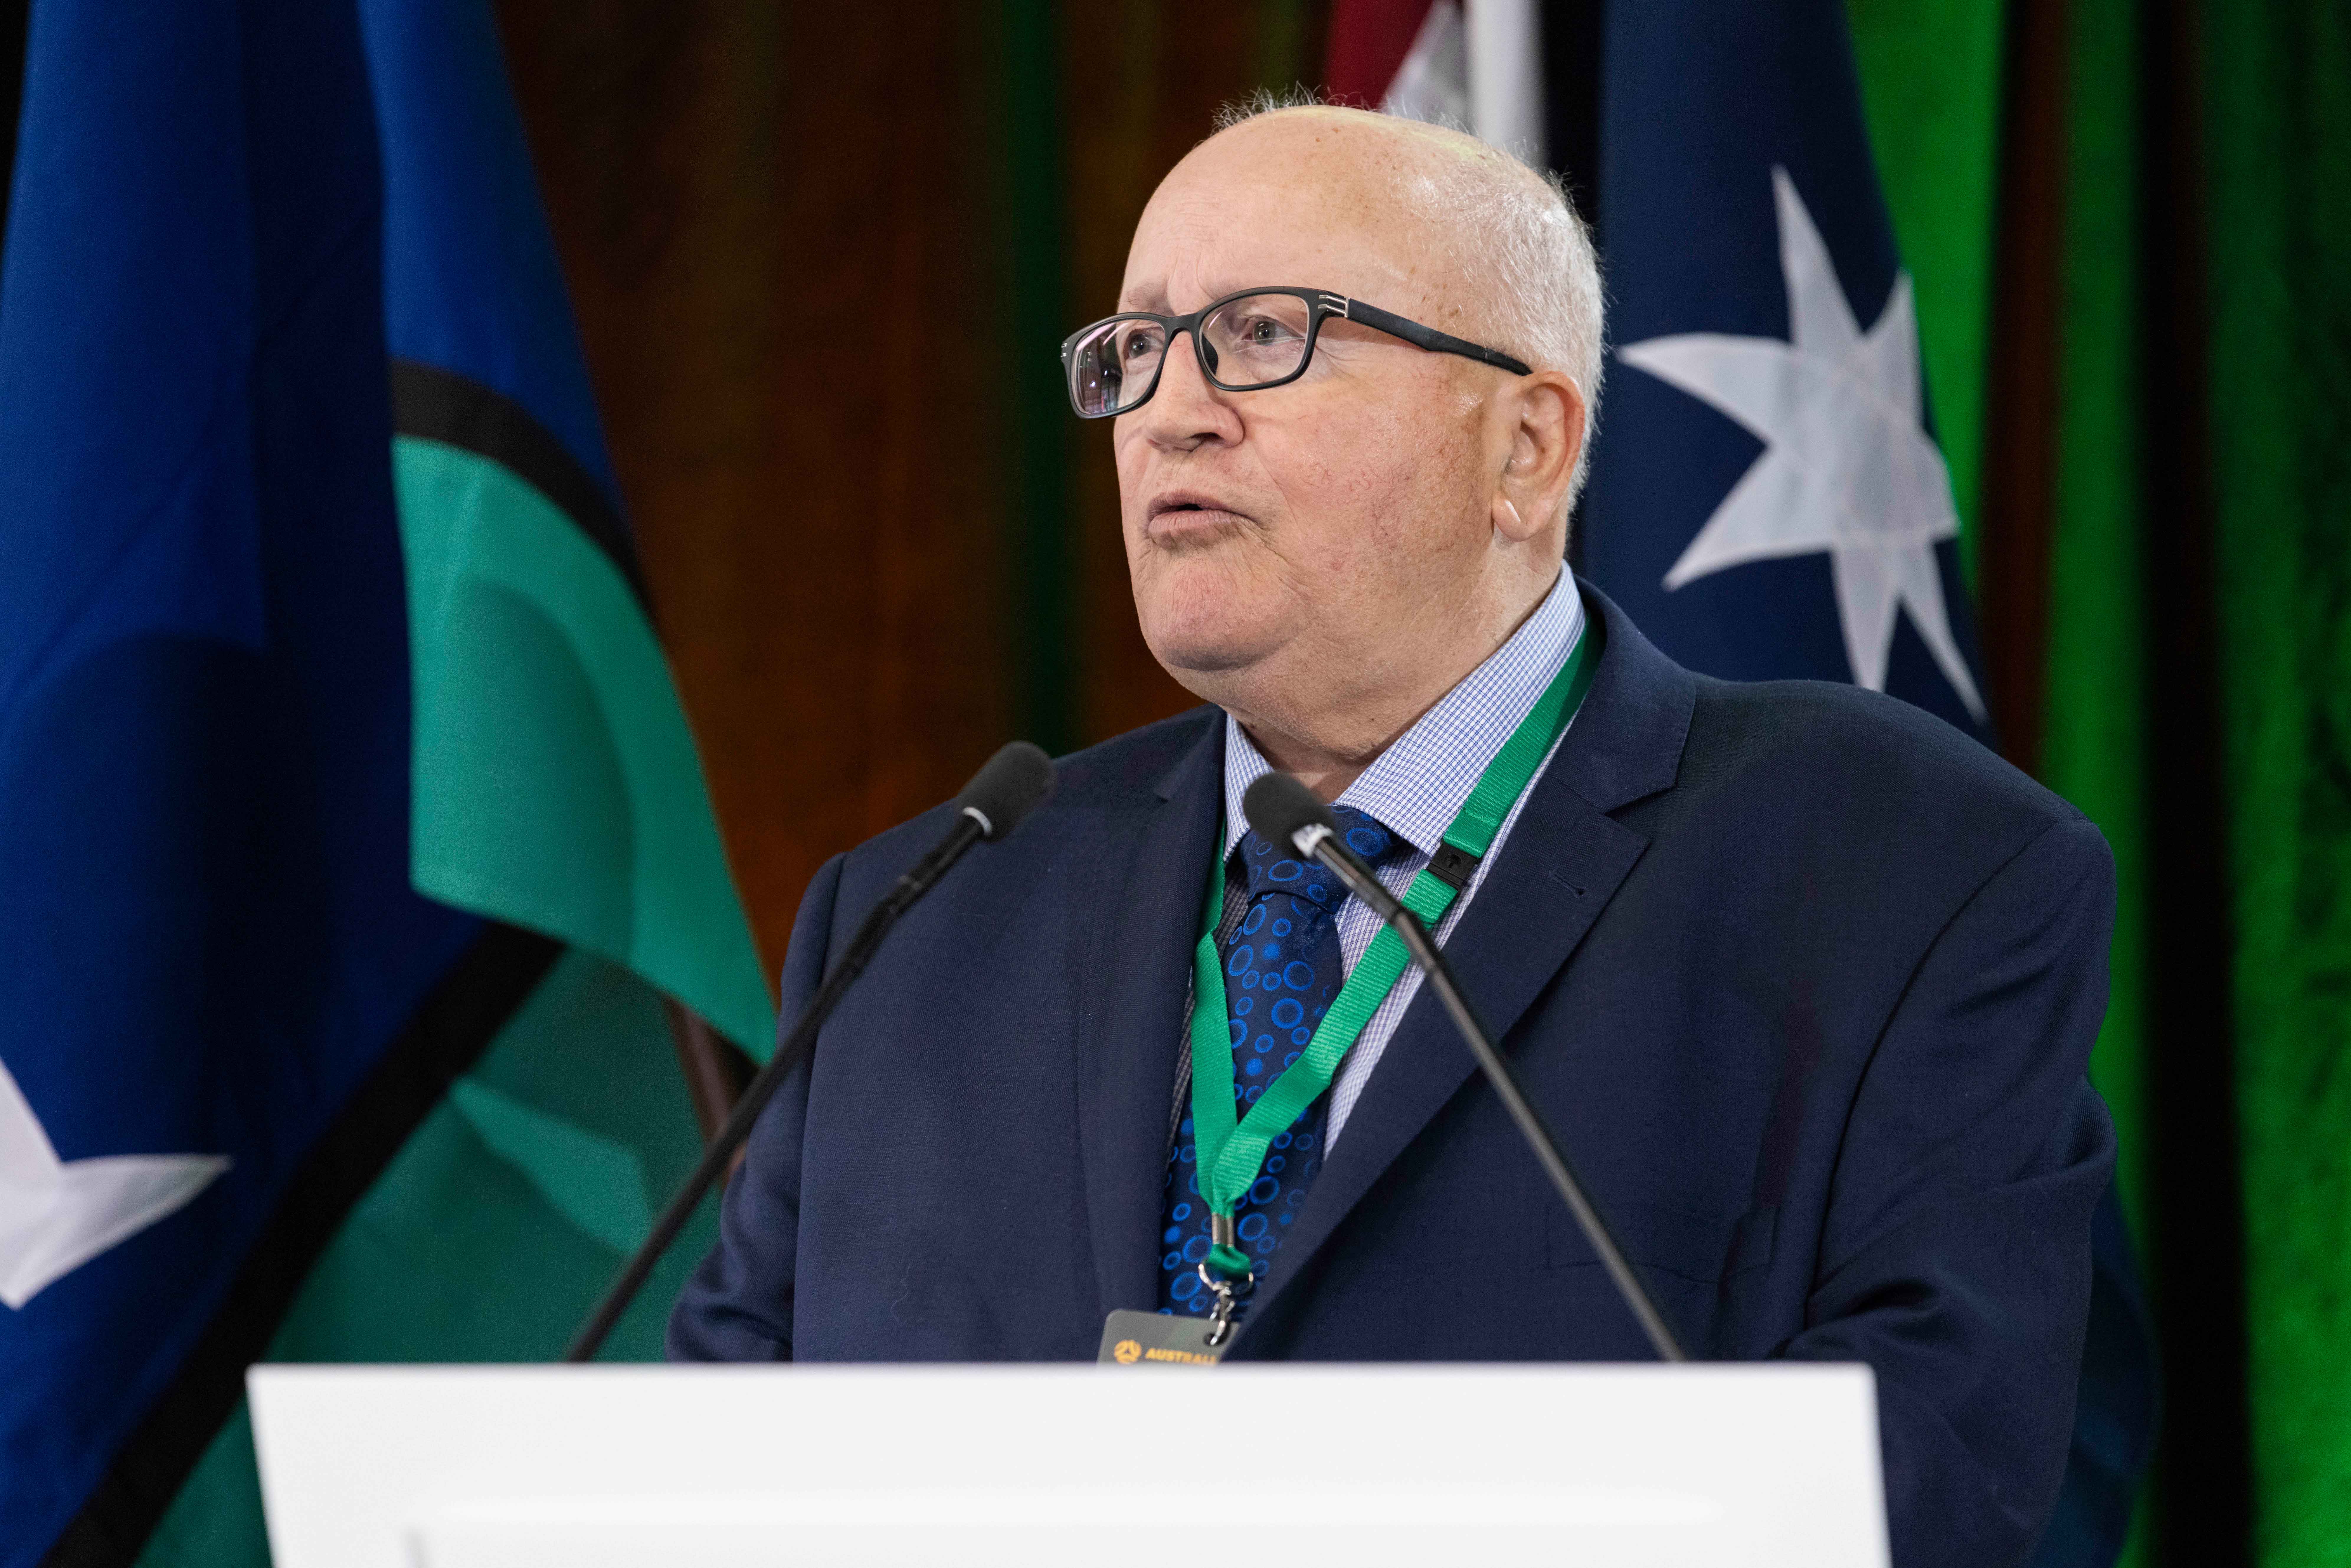 Walter Press making his acceptance speech after being inducted into the Football Australia Hall of Fame in 2022. (Photo: Tiffany Williams/Football Australia)